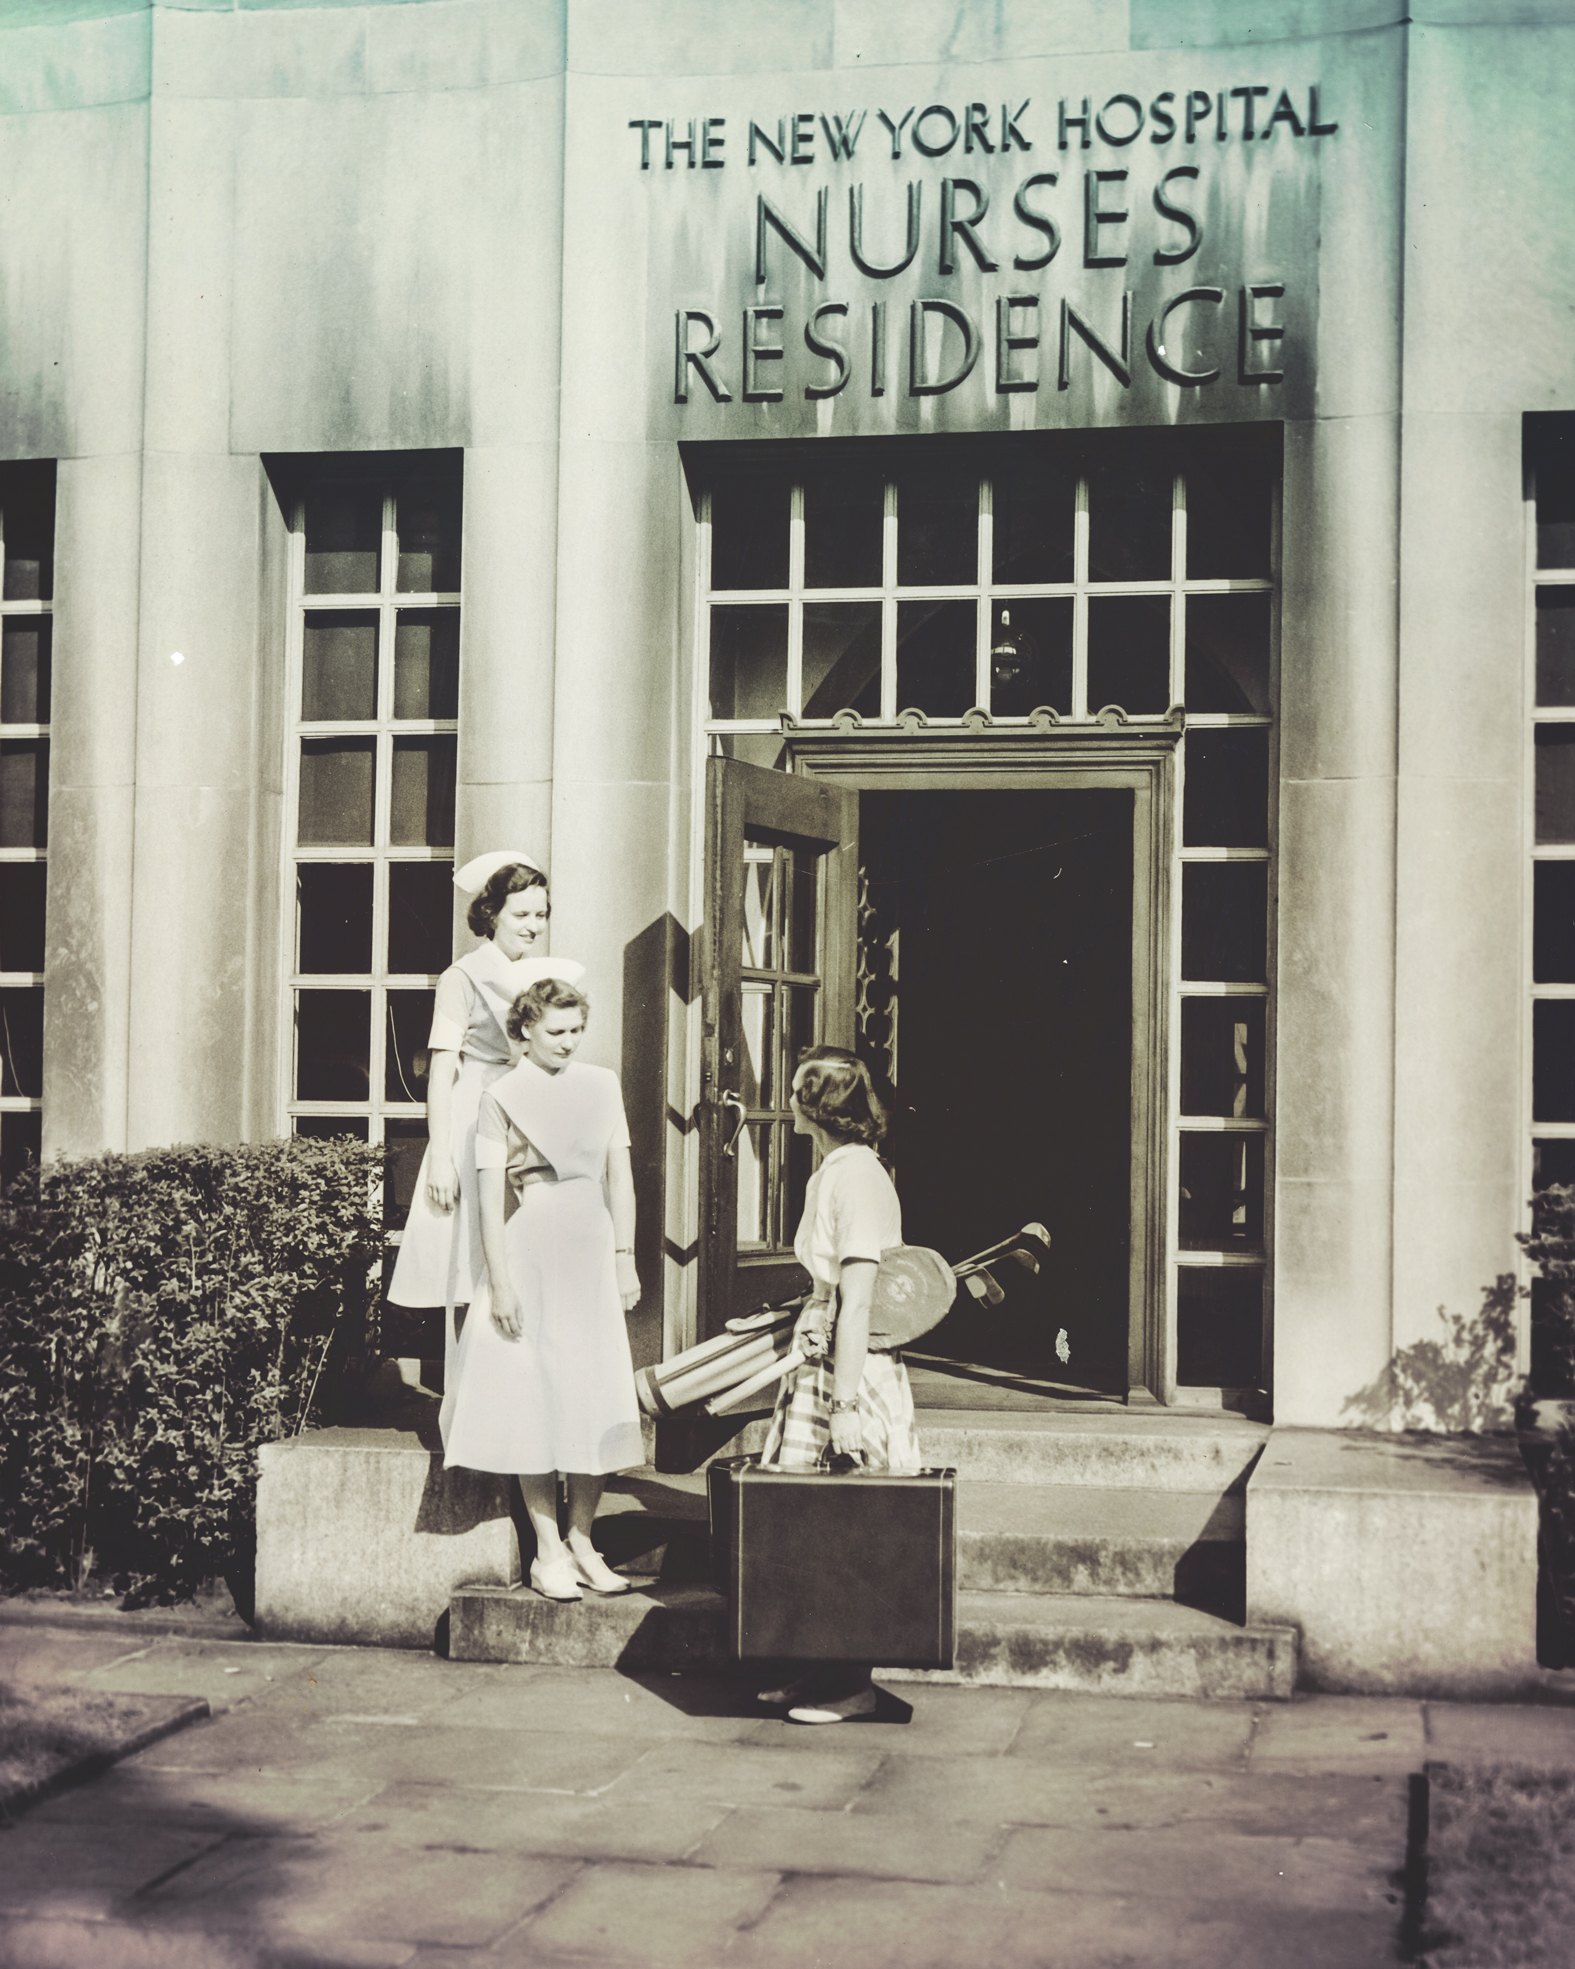 Students at the entrance of the nurses’ residence, 1949